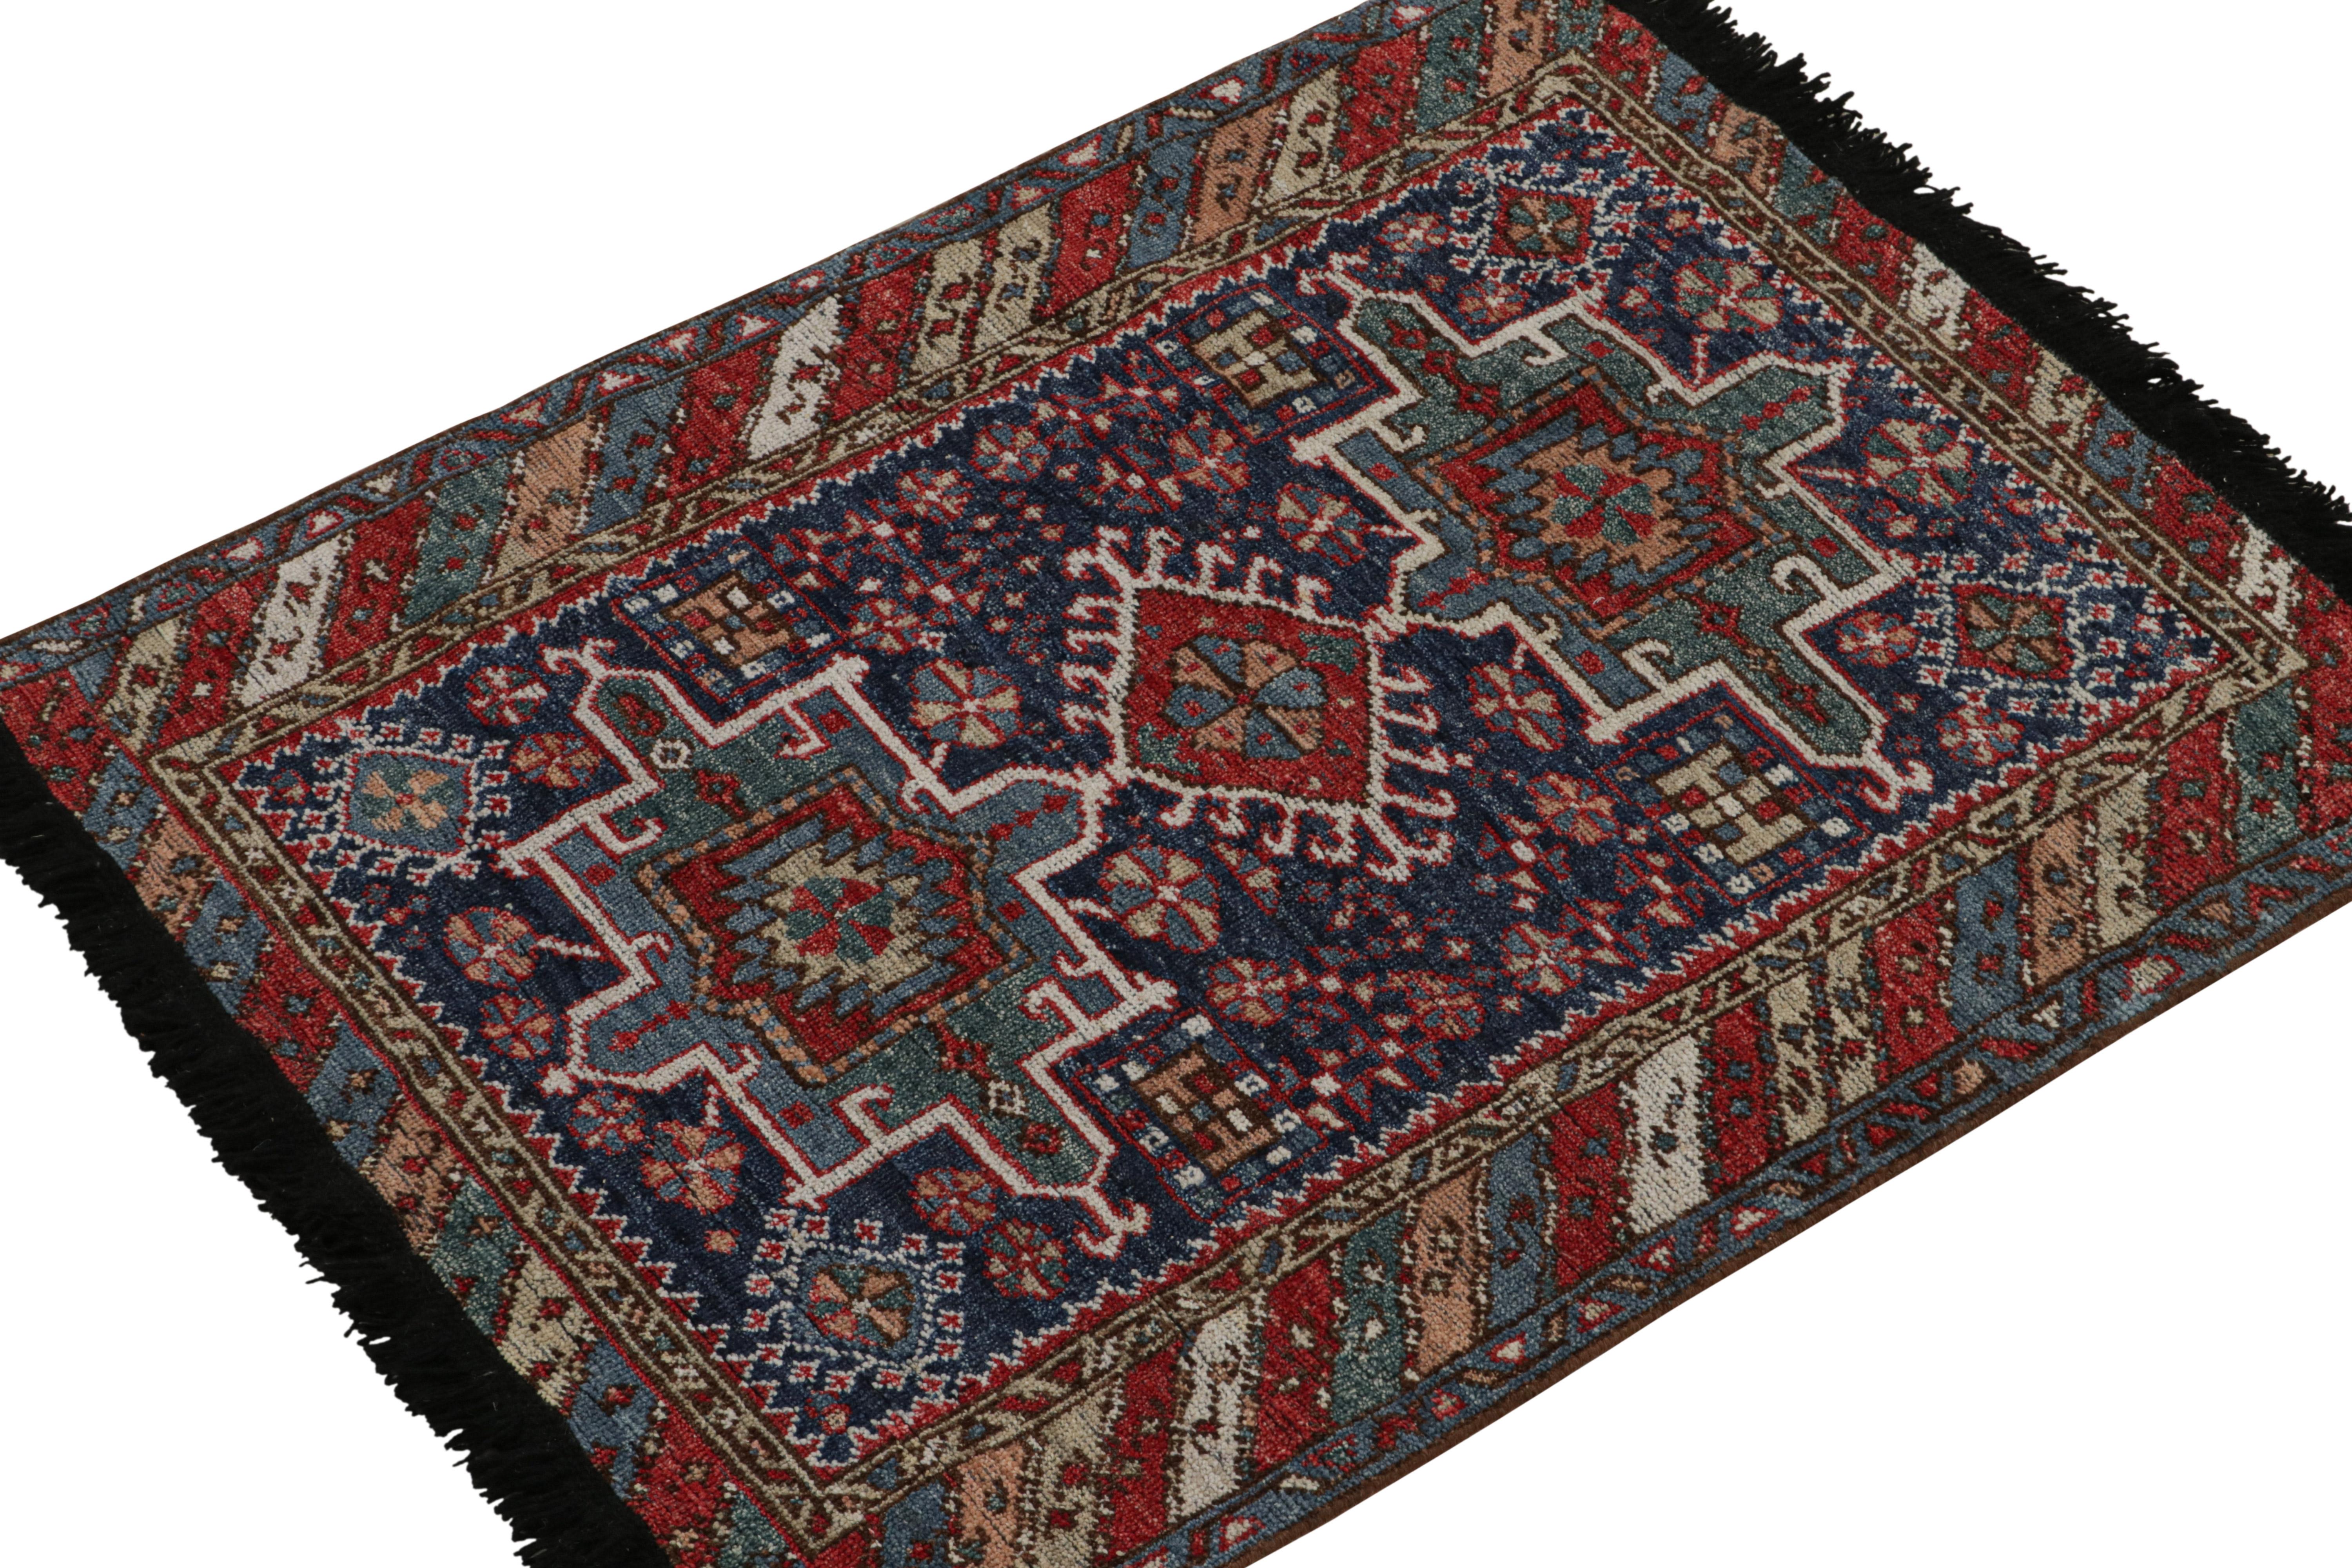 This 3x4 rug is a grand new entry to Rug & Kilim’s custom classics Burano collection. Hand-knotted in wool.

On the design

This rug is inspired by Persian tribal rugs in rich colors of red, blue, white & brown. 

A cozy contemporary take on a